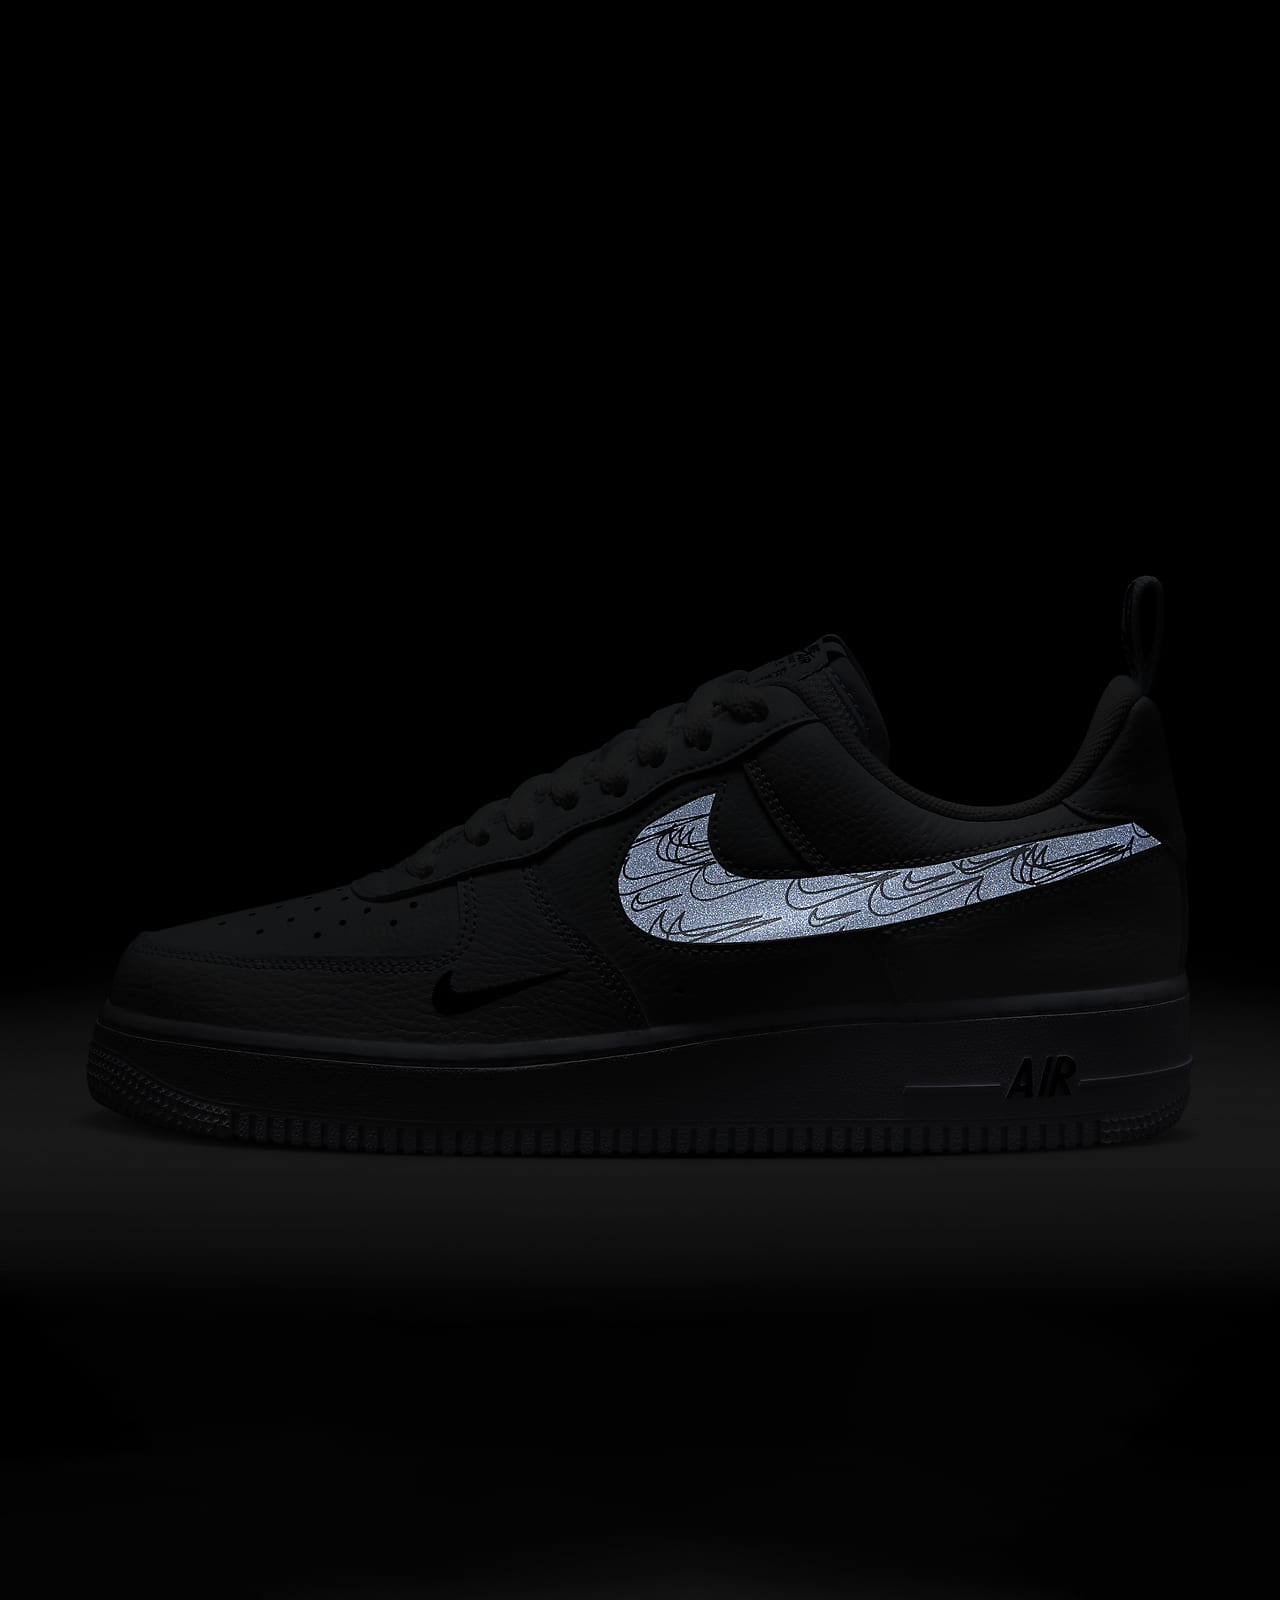 Nike Air Force 1 Low Cut Out Swoosh Black Reflective shoes 